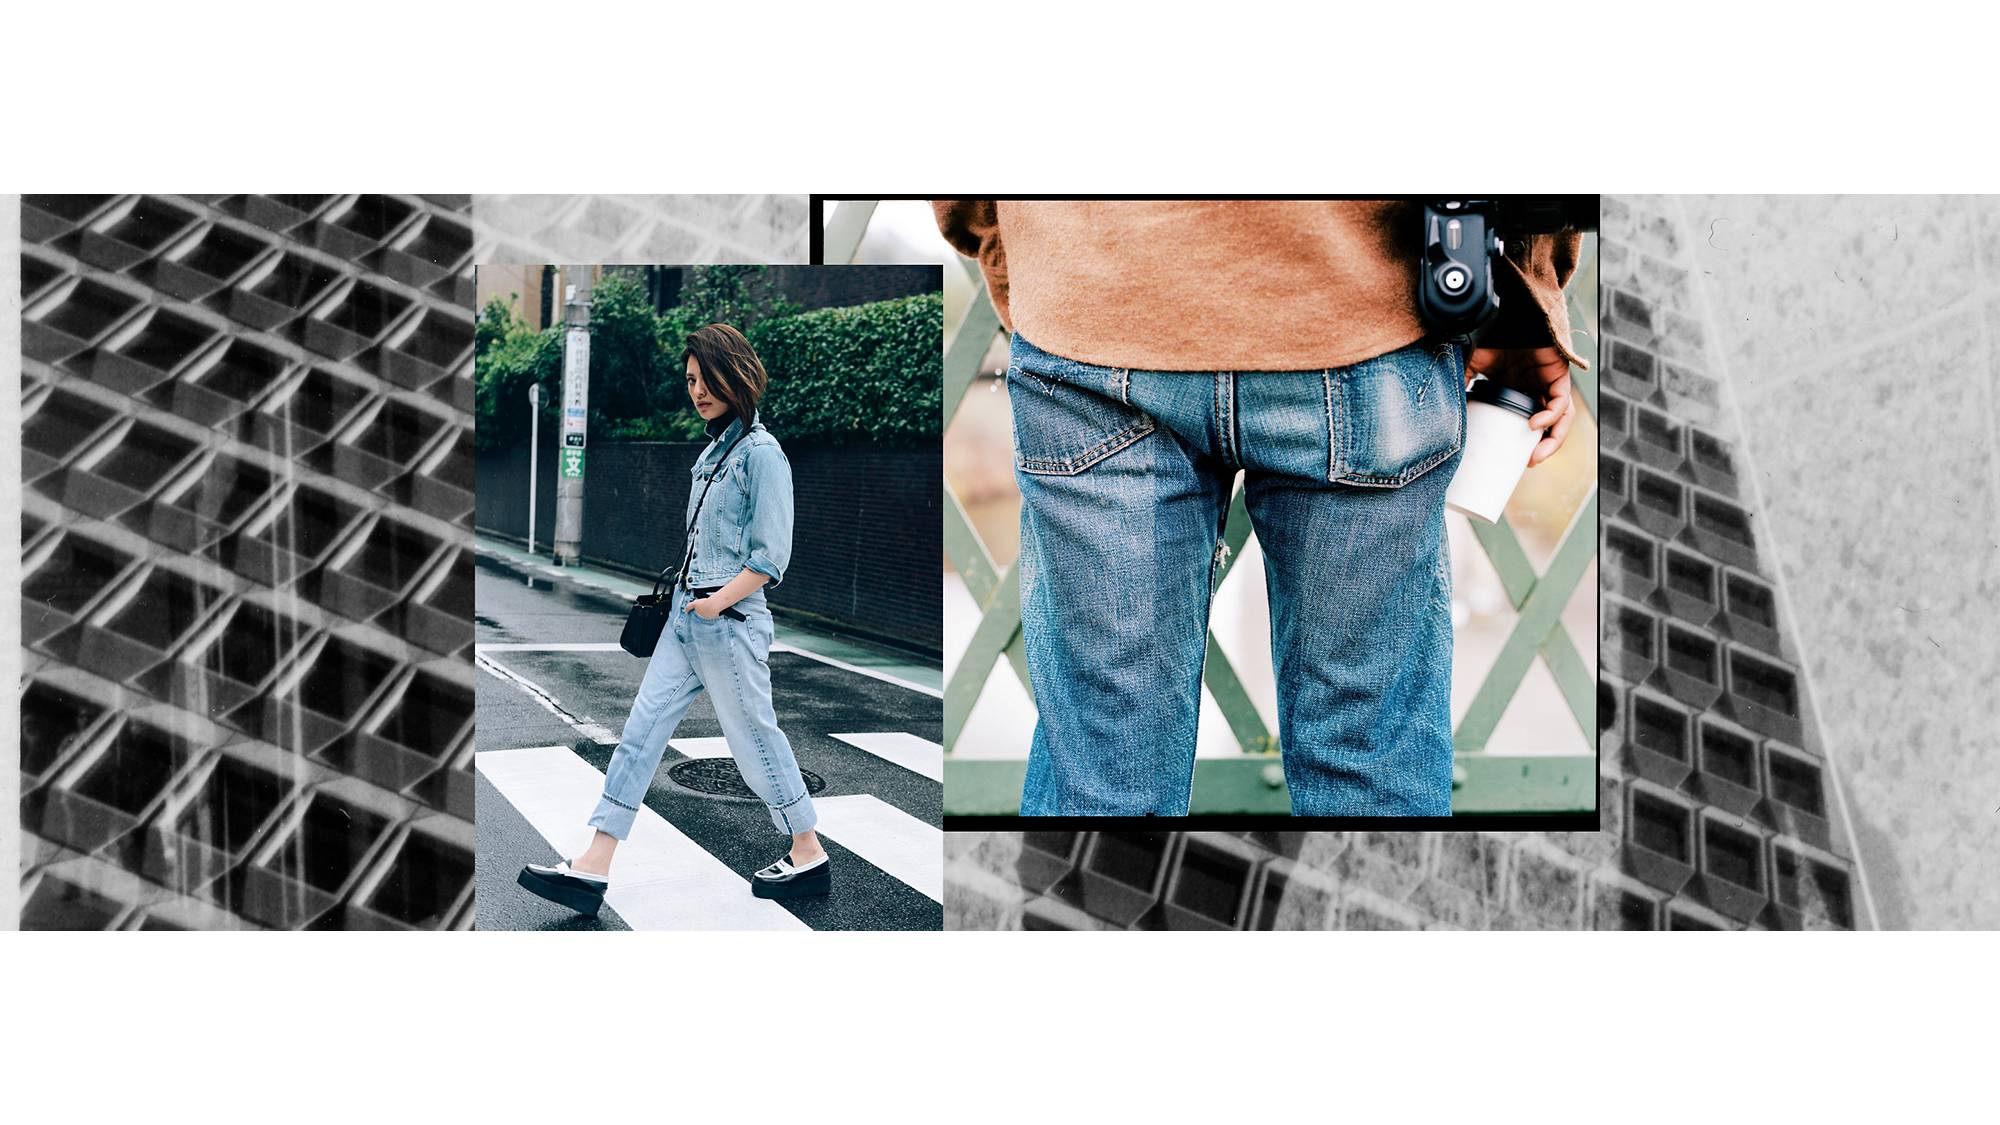 How To Buy Vintage Levi's 501s, According To The Experts